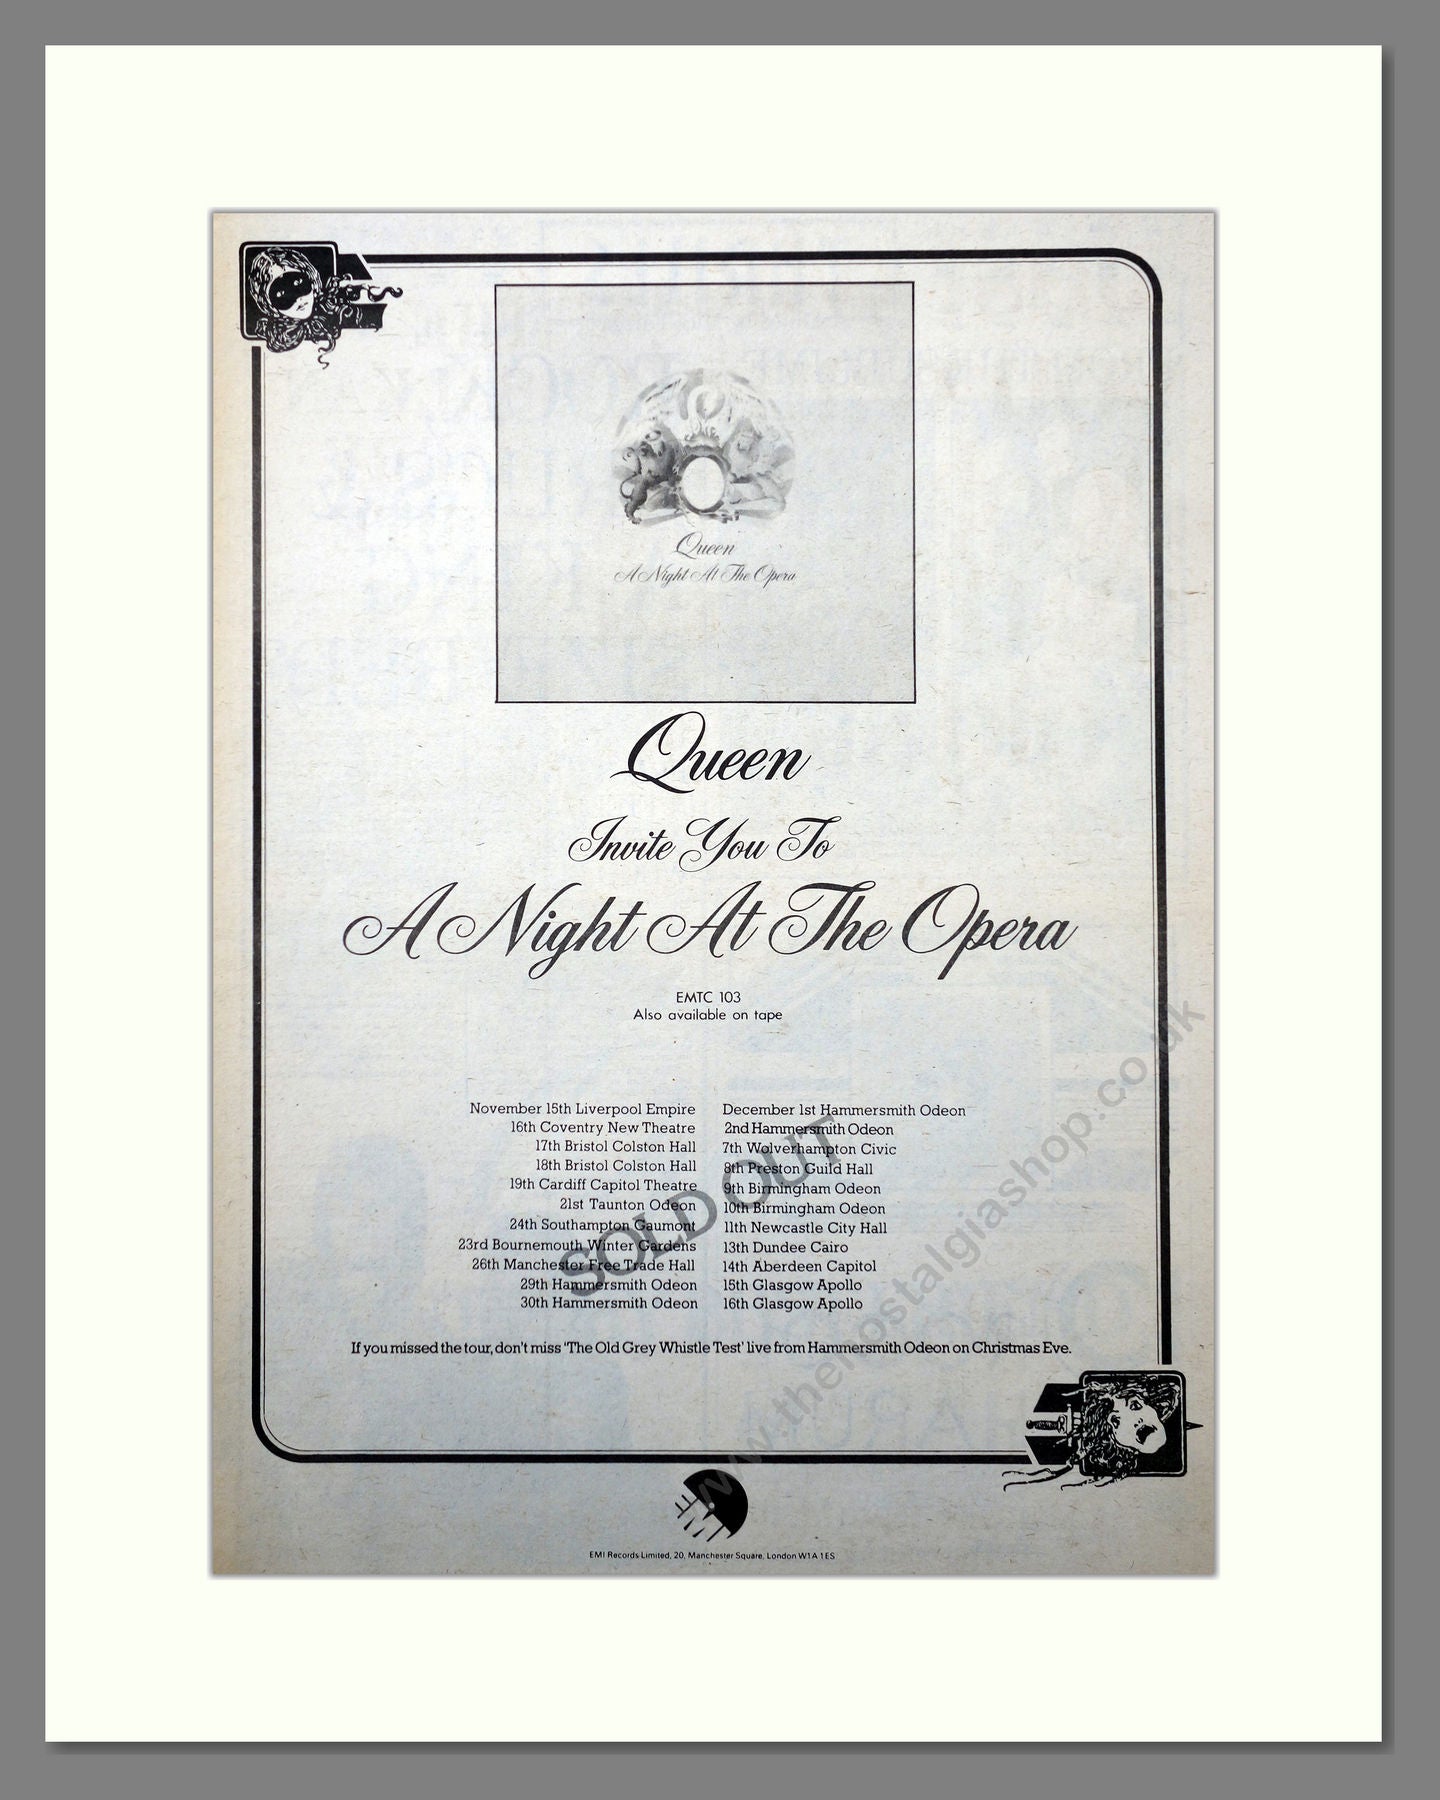 Queen. A Night At The Opera. UK Tour Dates. 1975 Large Original Advert (ref AD15684)